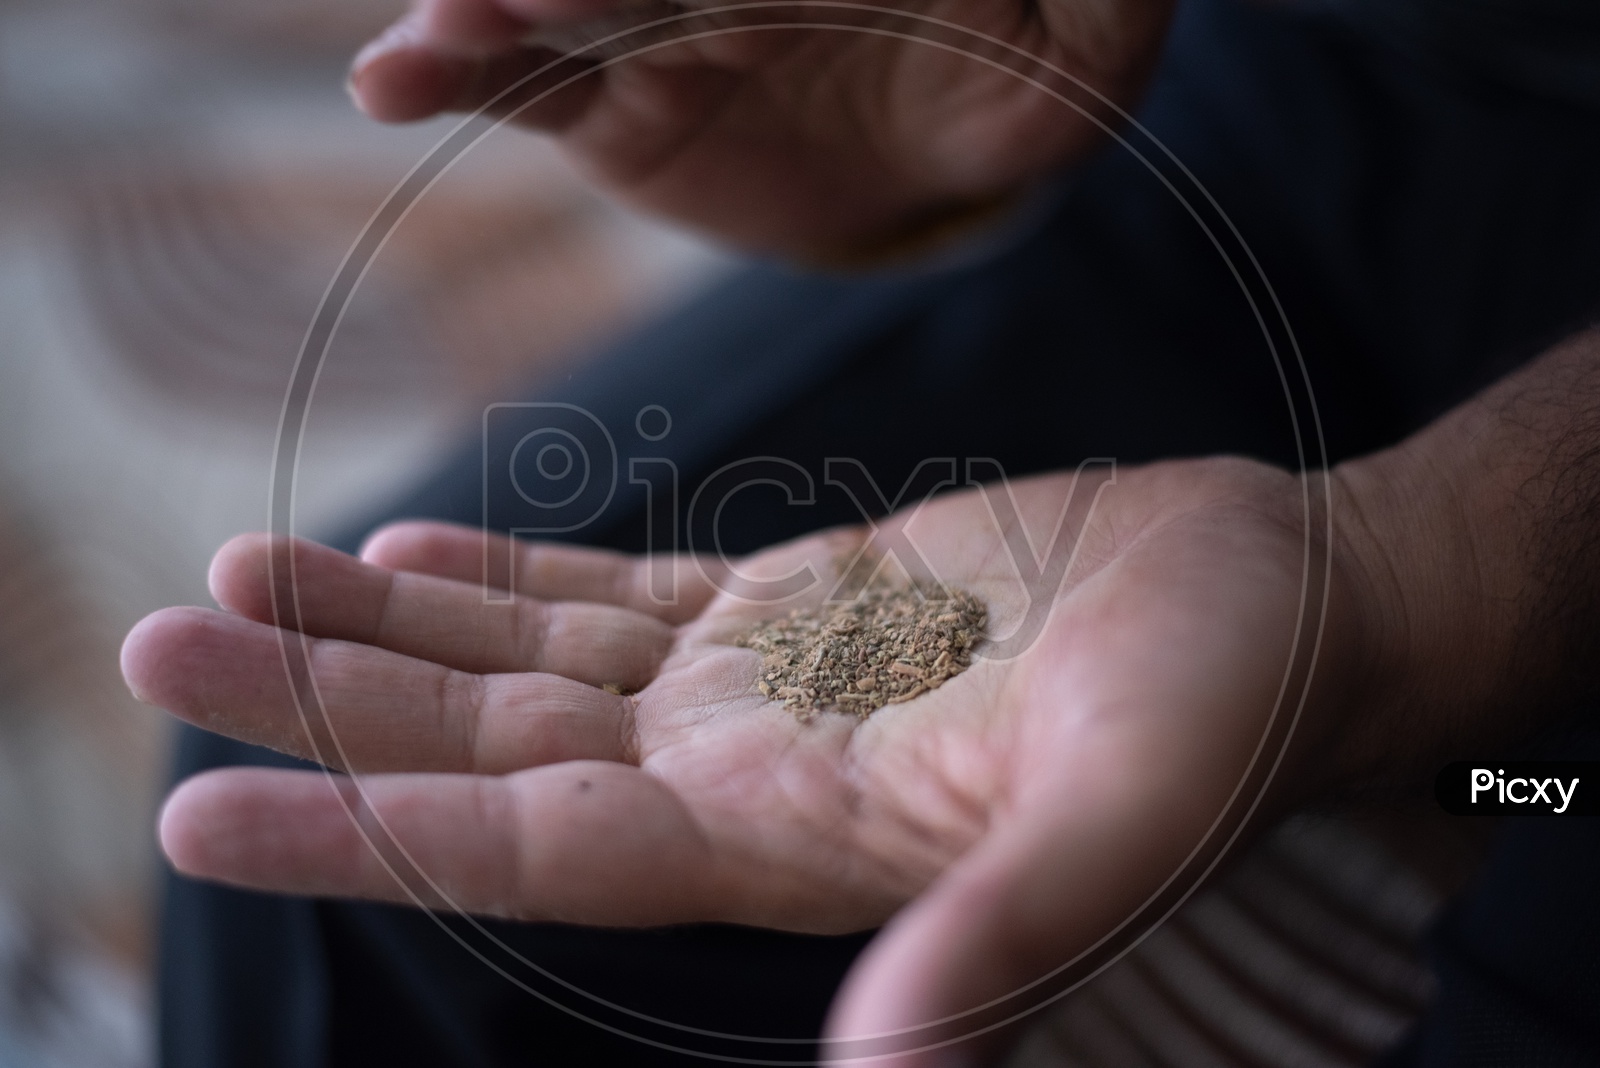 A Young Indian Man Attrition The Marijuna Or Ganja or Weed Leafs  In Hand Closeup